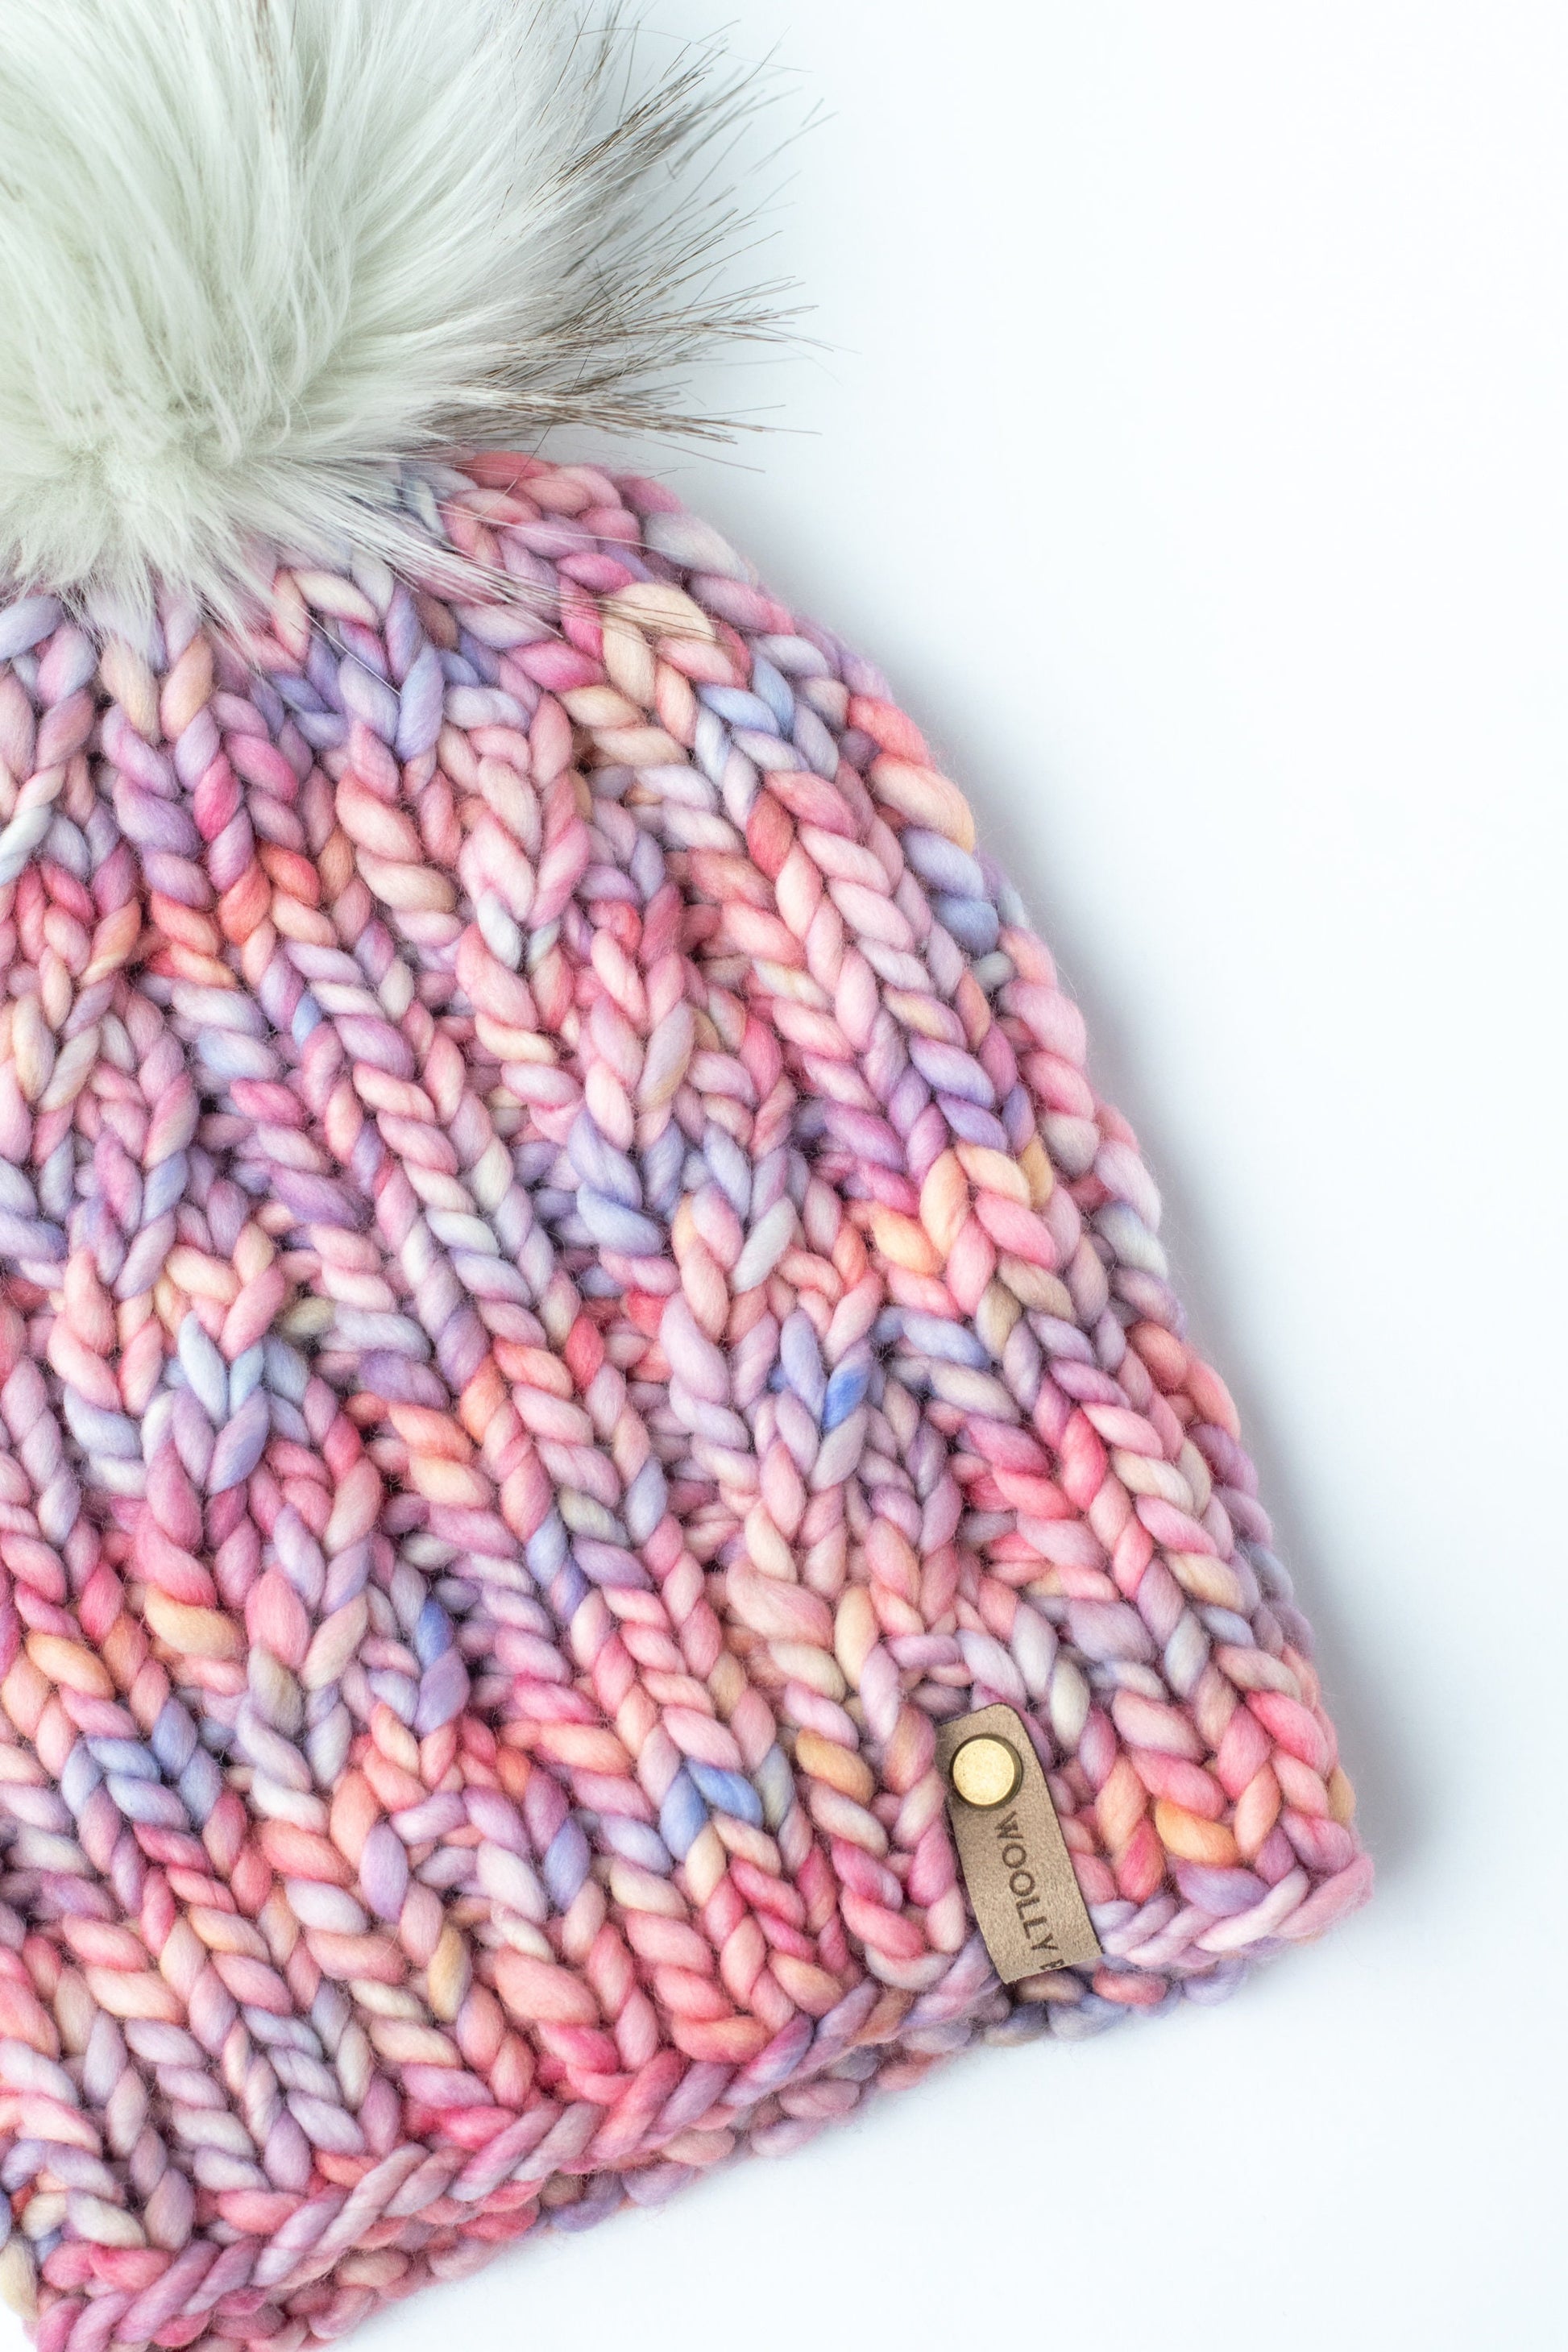 KNITTING PATTERN: Spindrift Beanie | Cable Knit Hat Pattern | Easy Super Bulky and Bulky Yarn Knitting Pattern